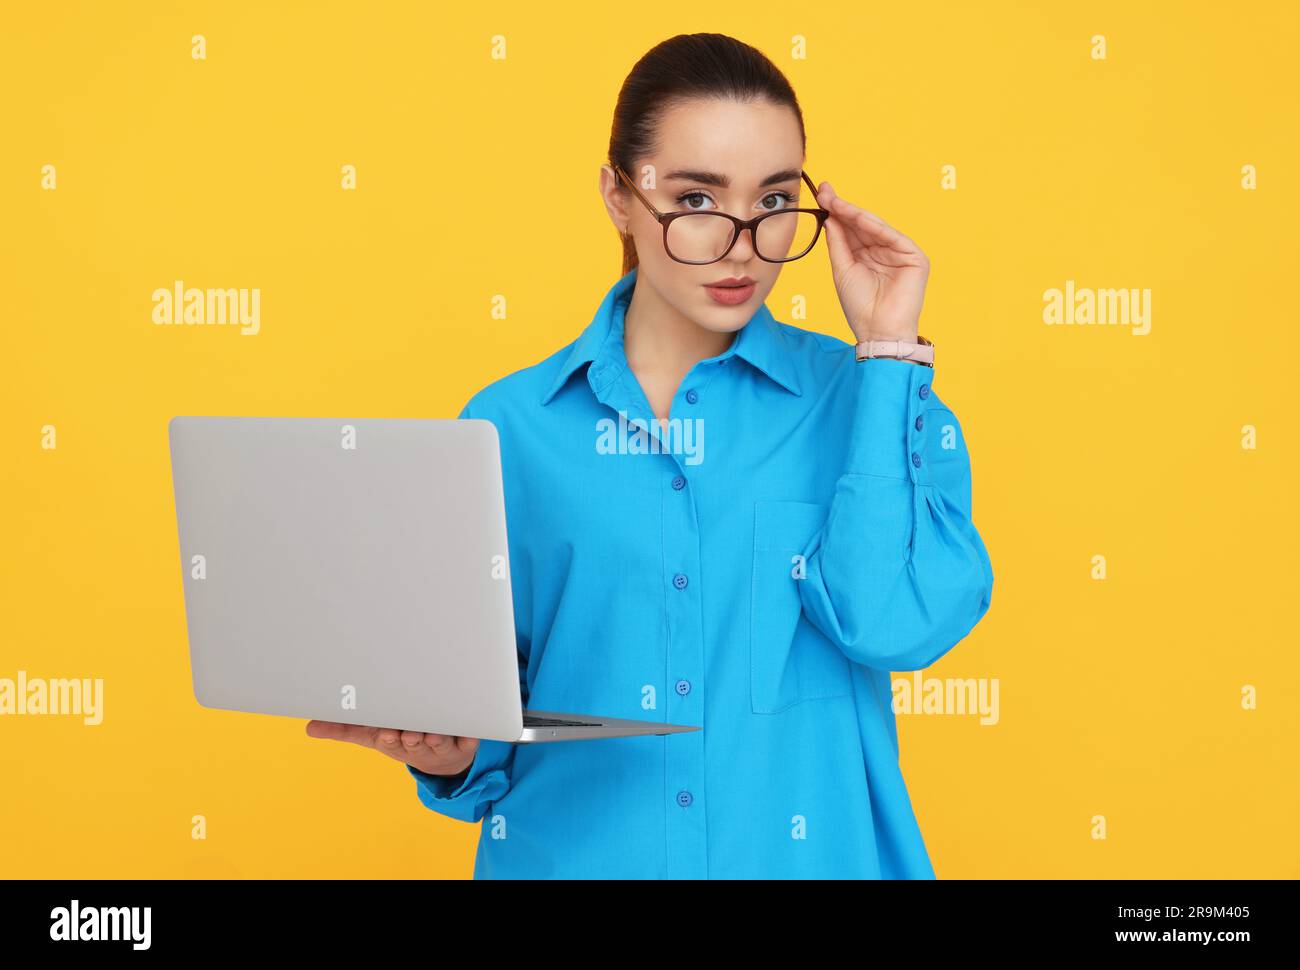 Young female intern with laptop on yellow background Stock Photo